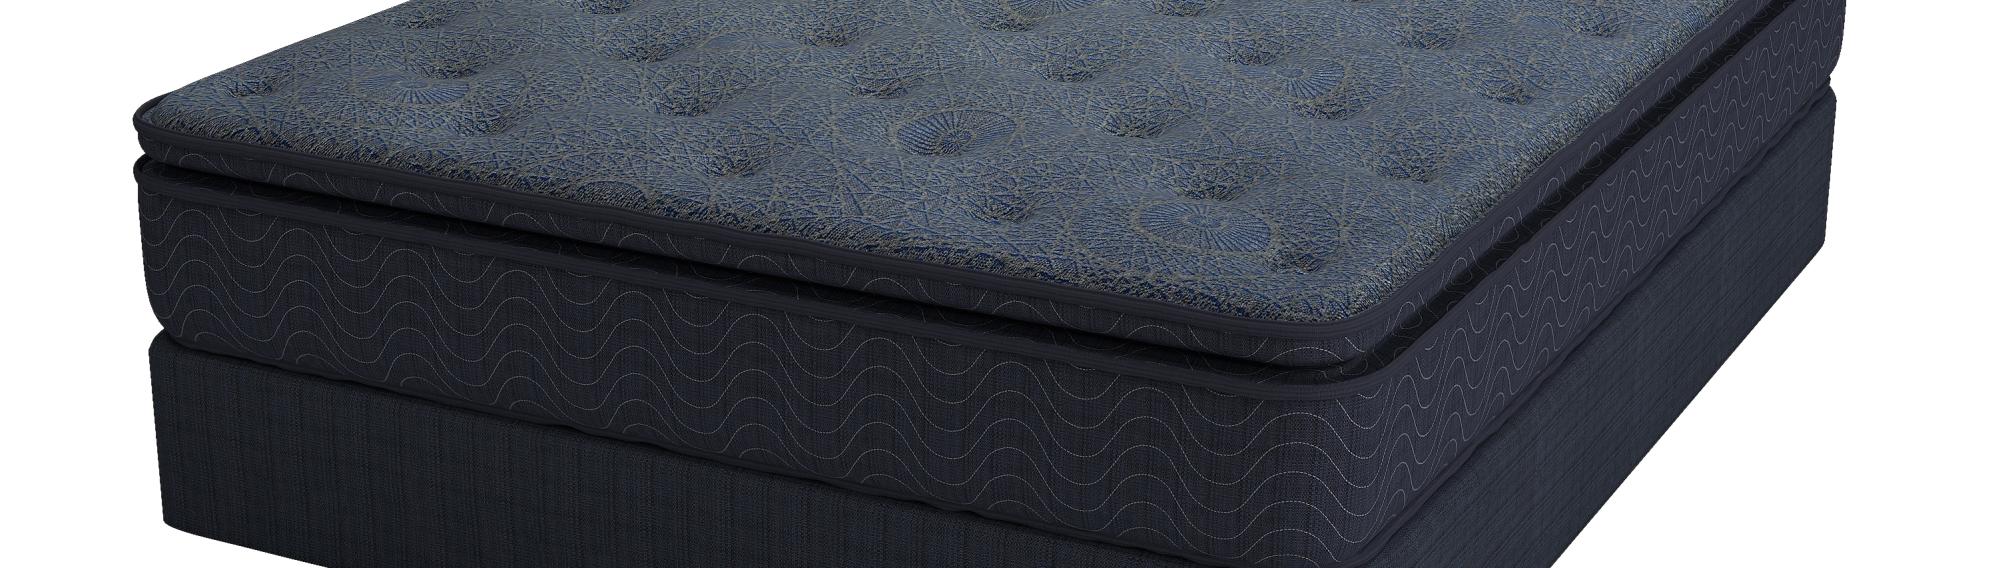 Image of a plush, affordable king mattress from Superior Rent to Own